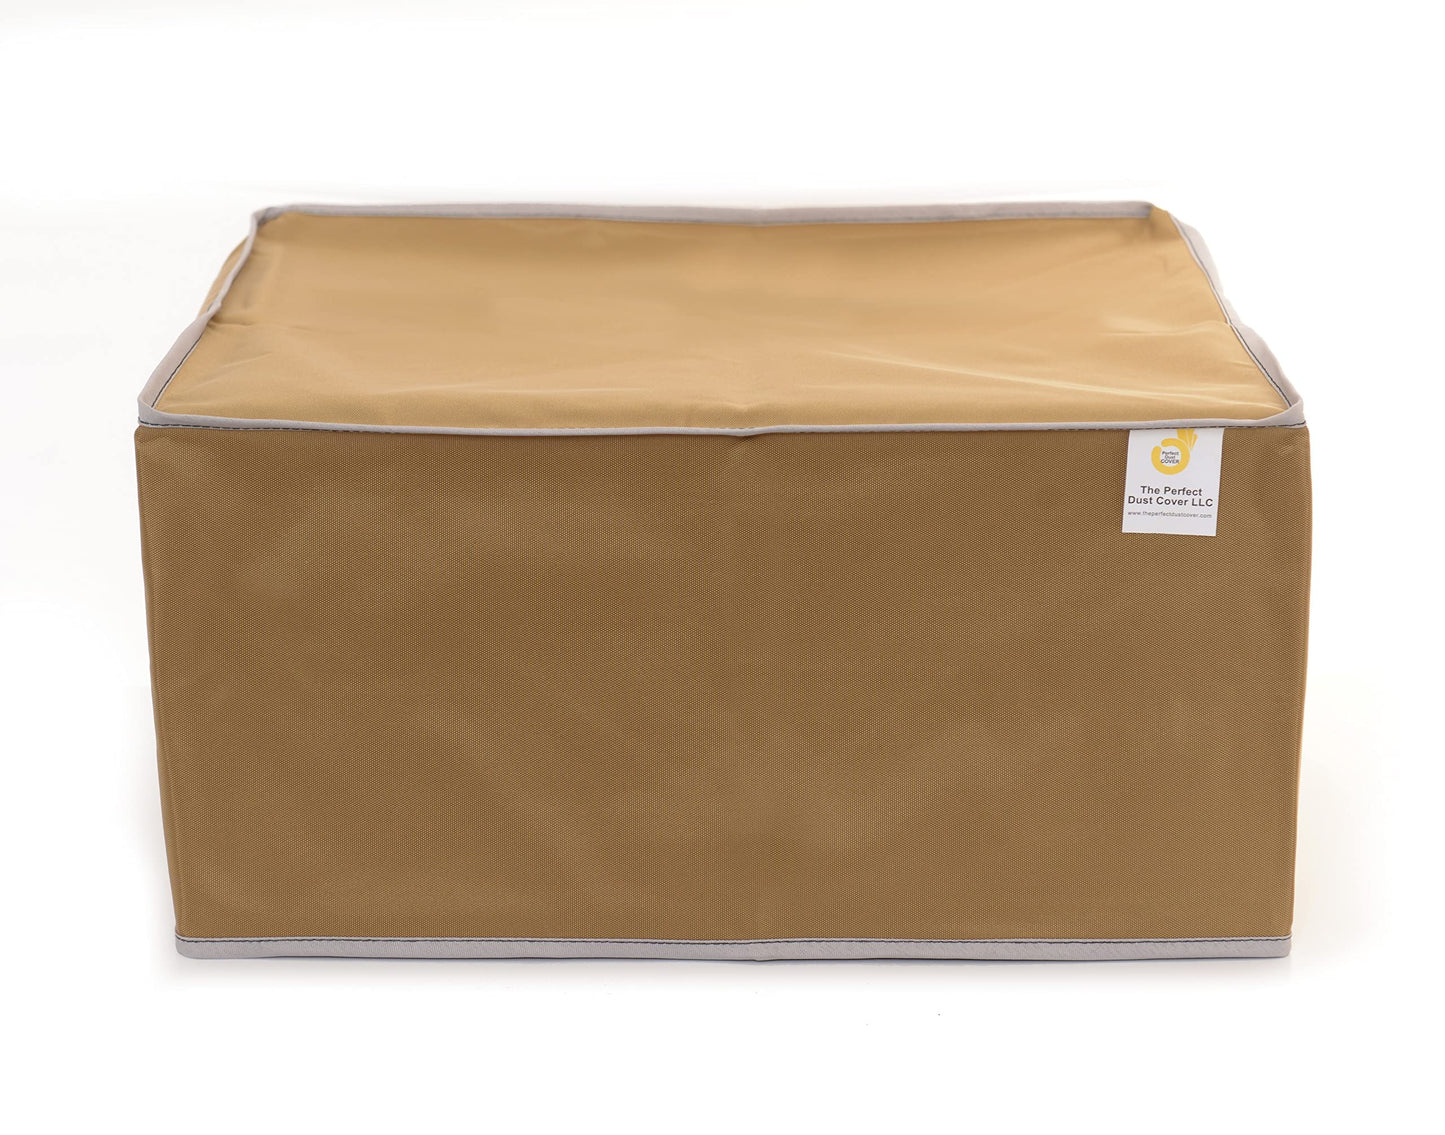 The Perfect Dust Cover, Tan Nylon Cover Compatible with Oster Digital French Door Oven Model TSSTTVFDDG, Anti Static, Double Stitched and Waterproof Cover by The Perfect Dust Cover LLC